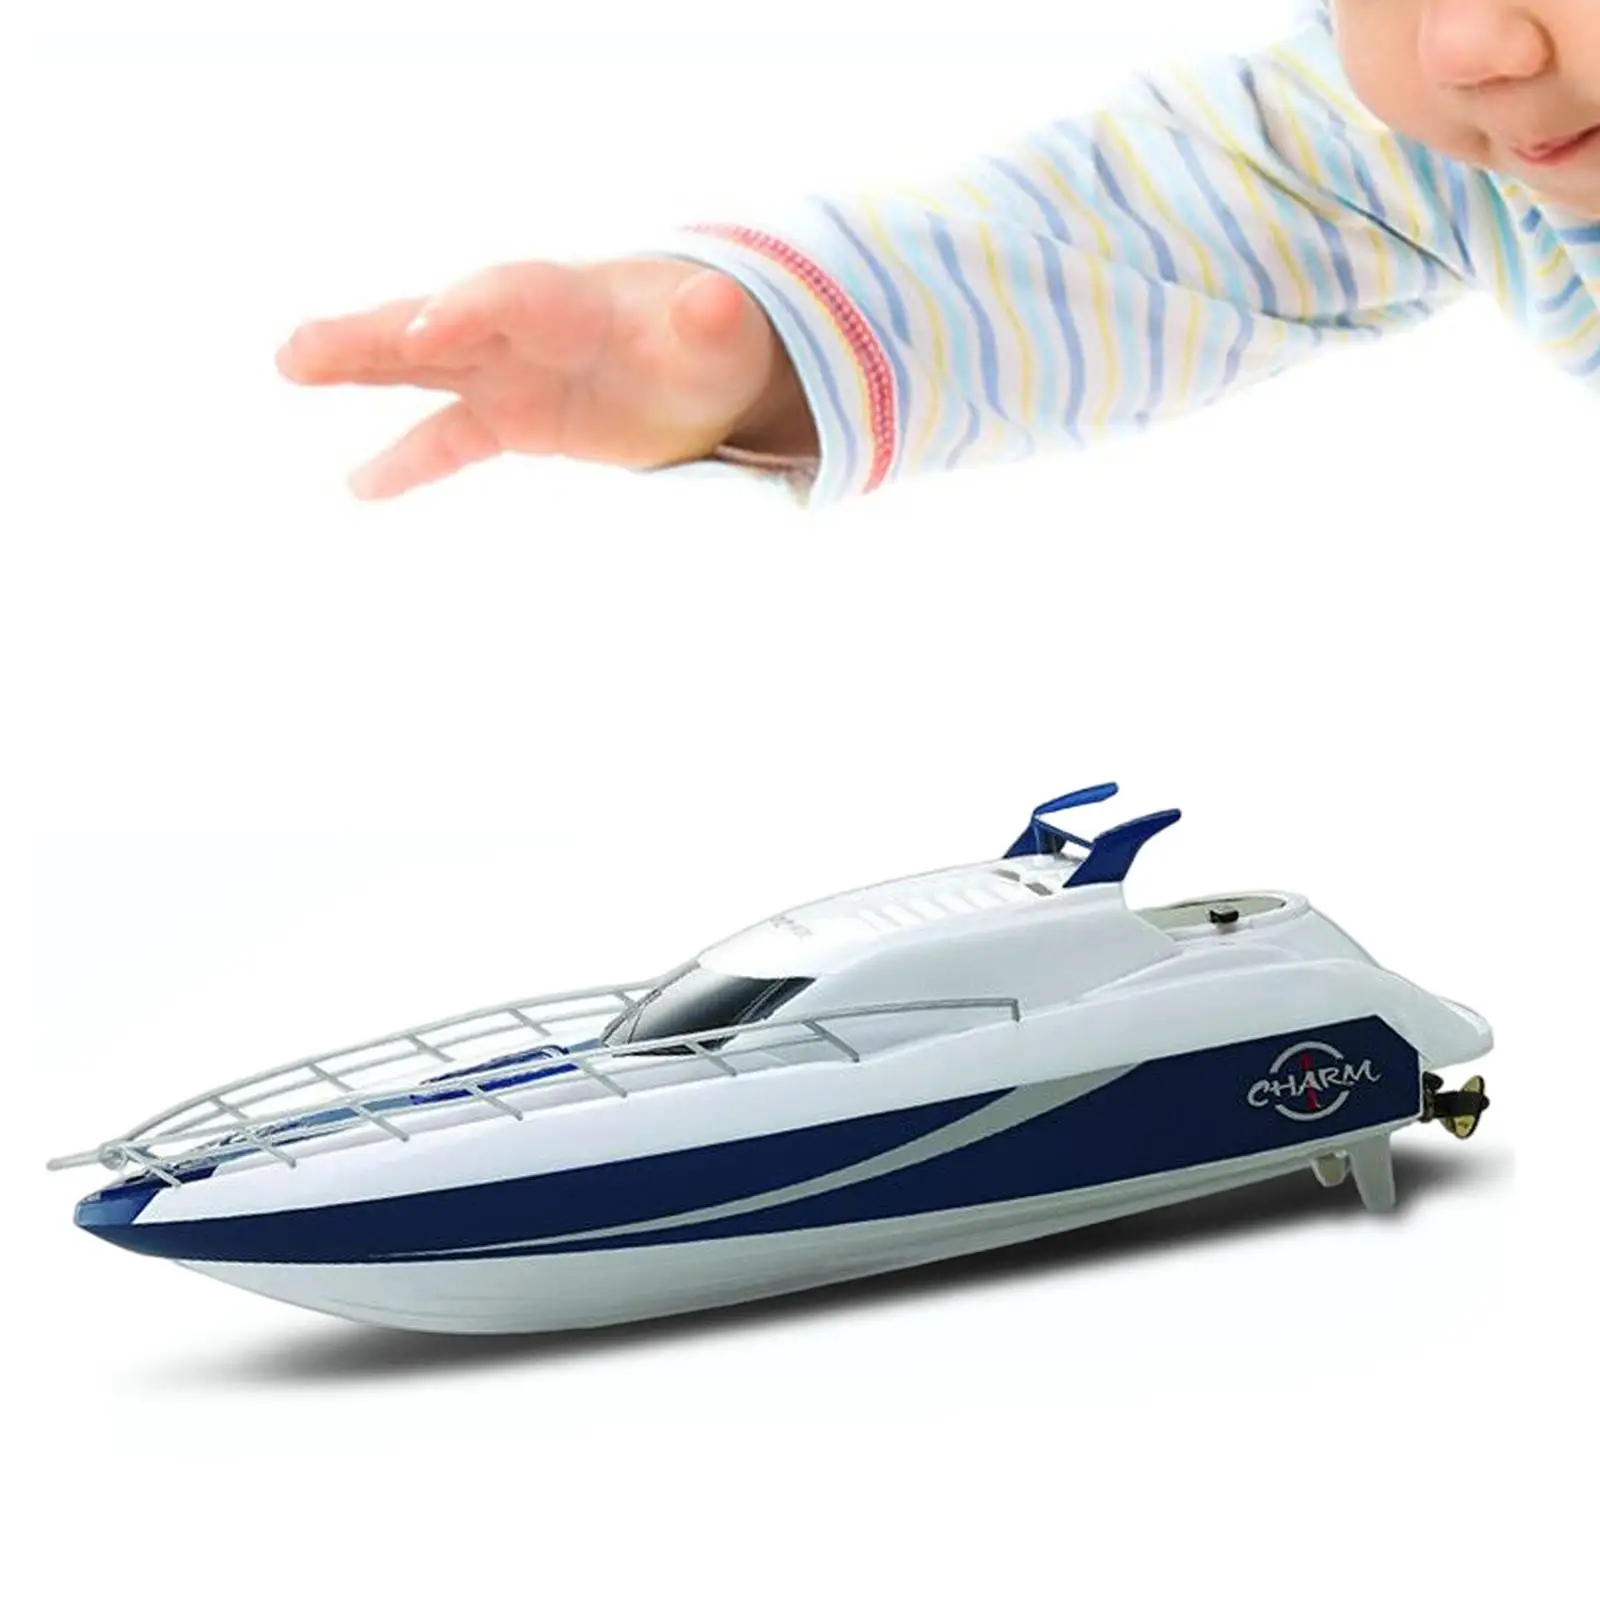 Portable Remote Control Boat RC Boat for Adults Children Birthday Gifts